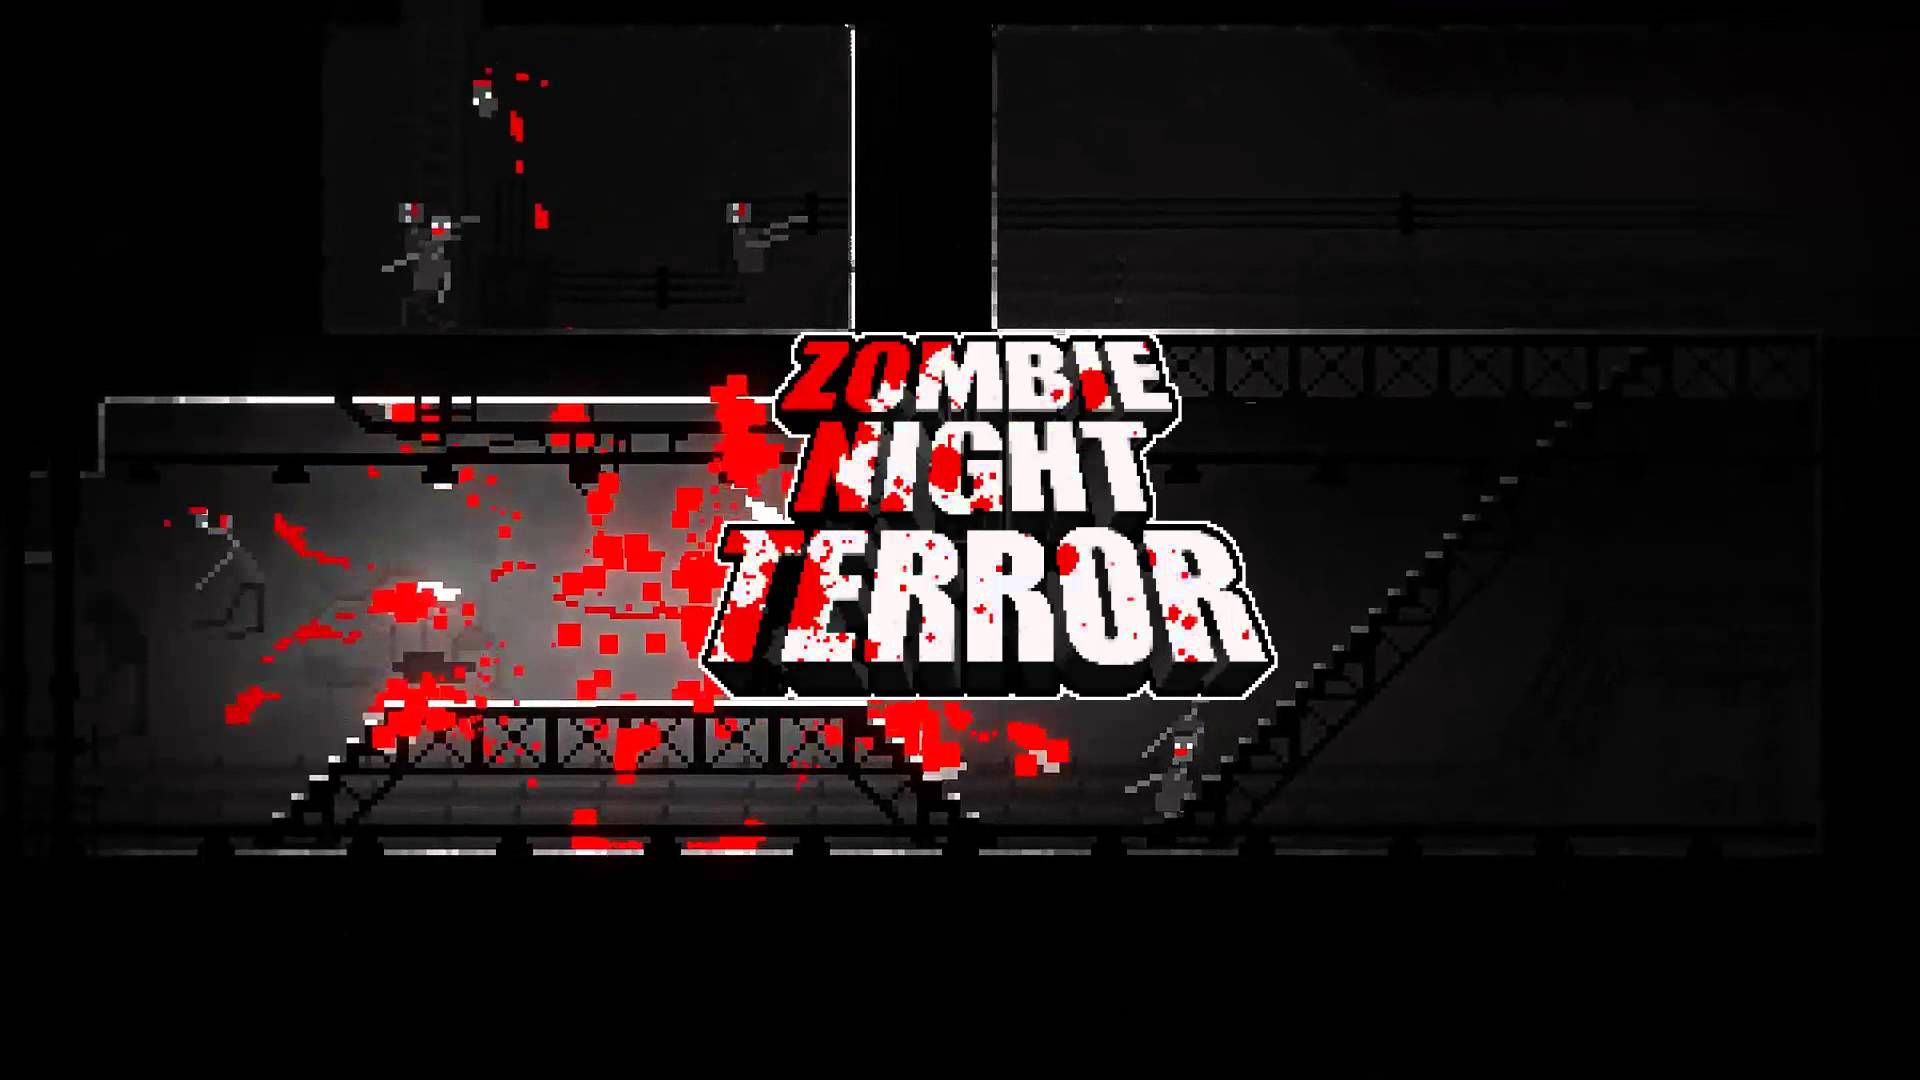 download night terror steam for free